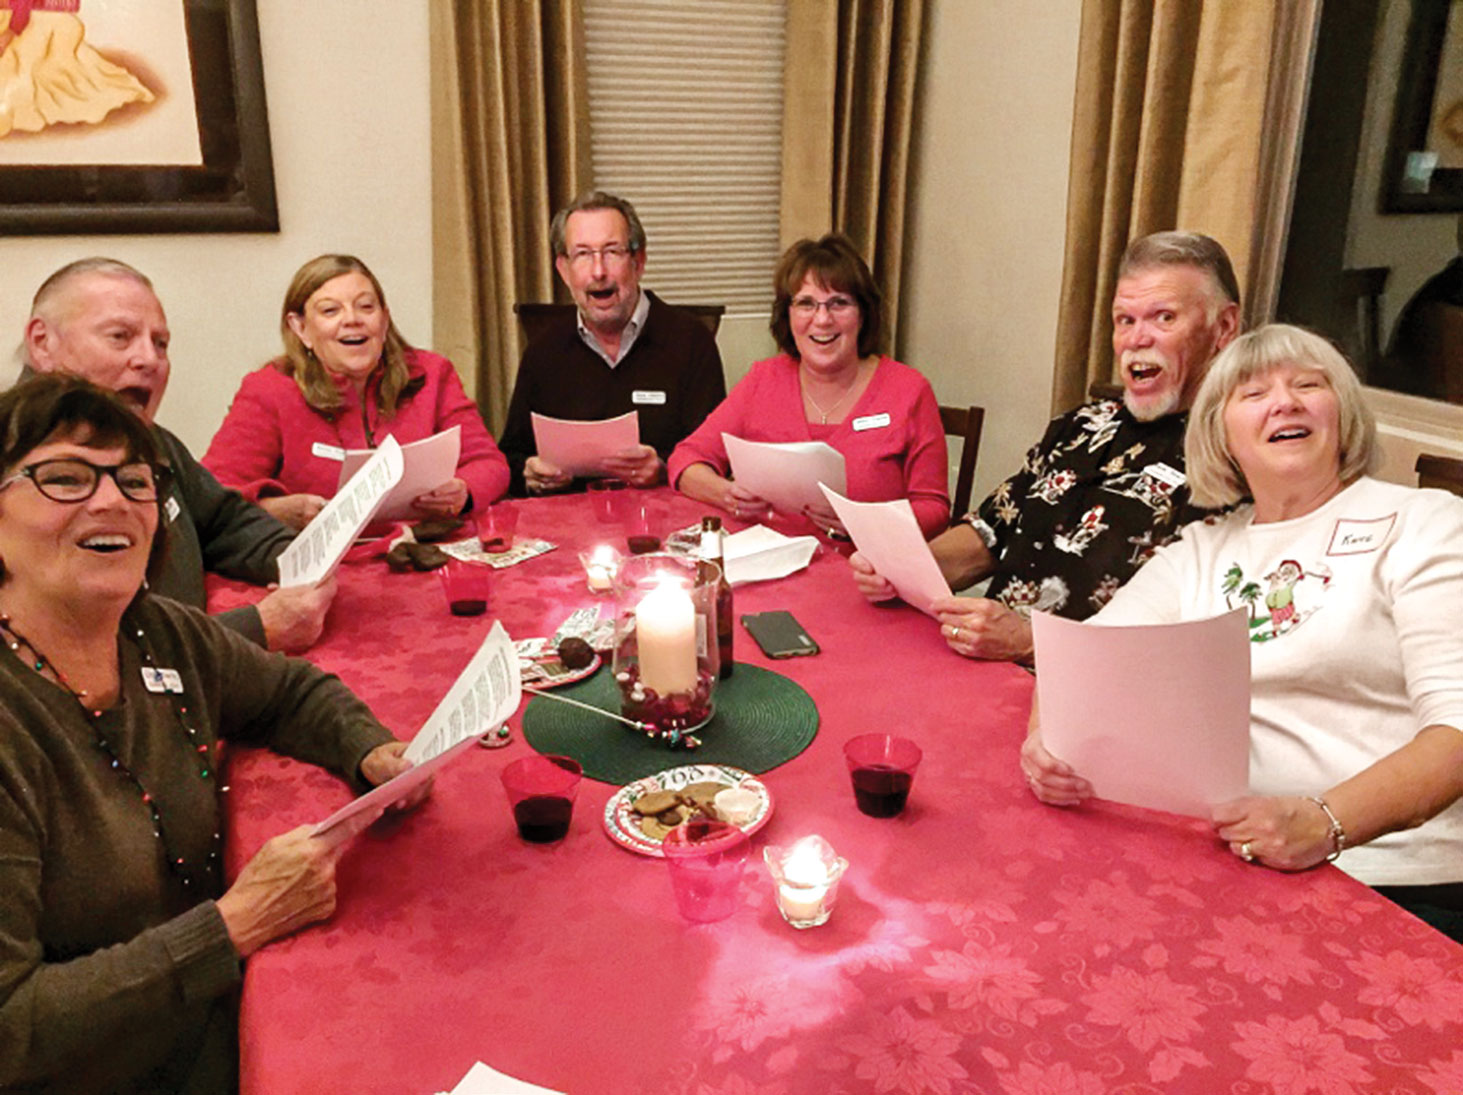 Just a few of the many singing that night, left to right: Linda Sherfy, Dick Ryan, Betty Ryan, Steve Chapman, Debbie Chapman, Frank Sherfy and Kate Thomsen around one of the tables; picture courtesy of Steve Weiss